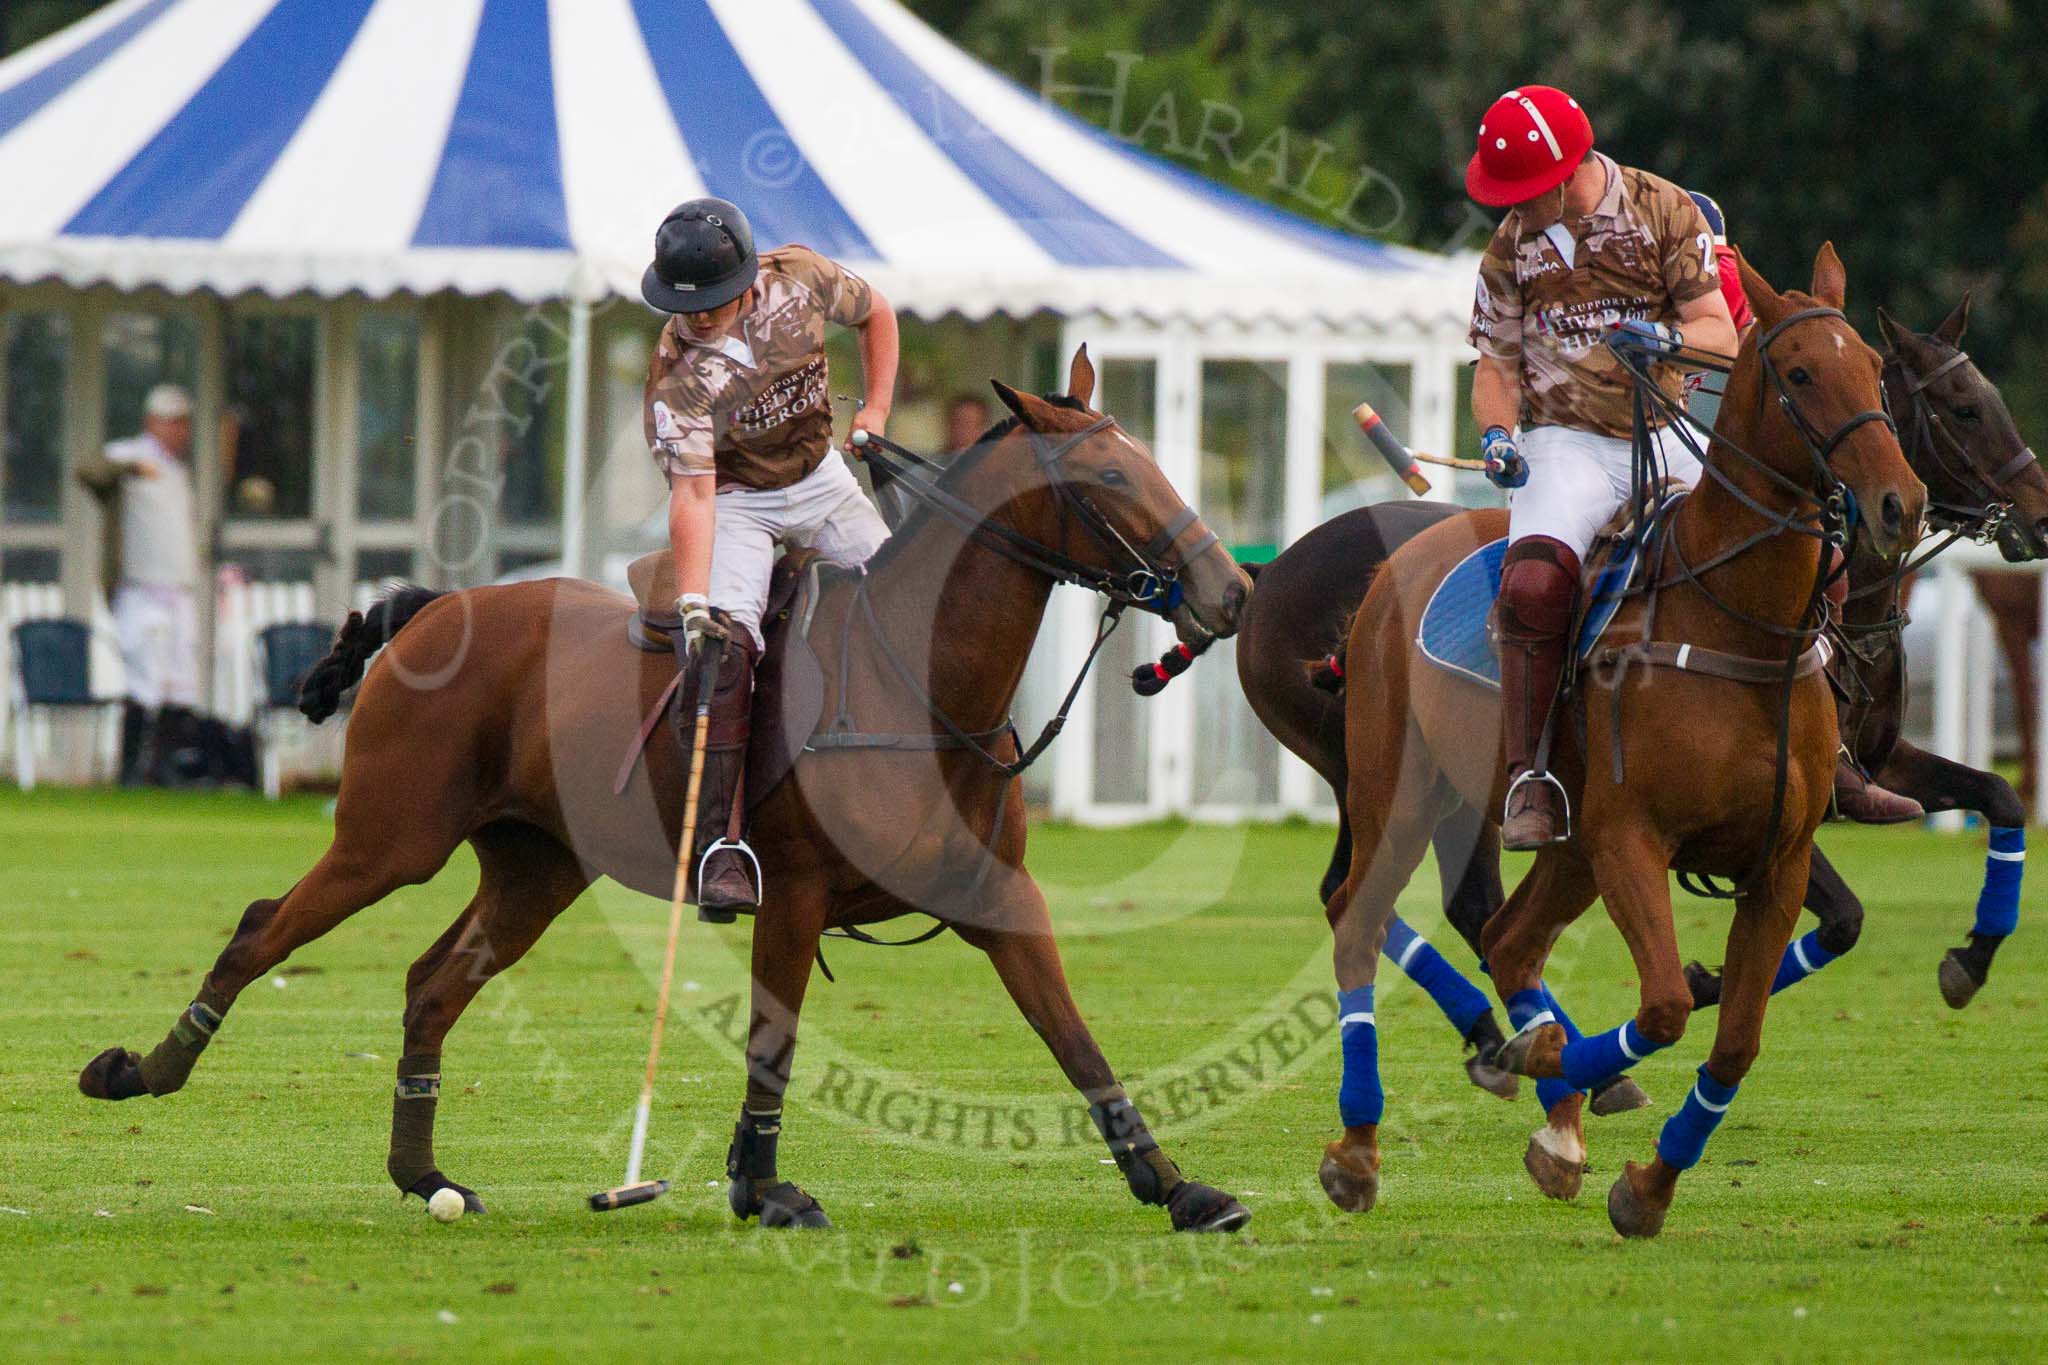 DBPC Polo in the Park 2012: Royal Artillery #4, Alex Vent, and #2, Major Andy Wood..
Dallas Burston Polo Club,
Stoneythorpe Estate,
Southam,
Warwickshire,
United Kingdom,
on 16 September 2012 at 18:25, image #321